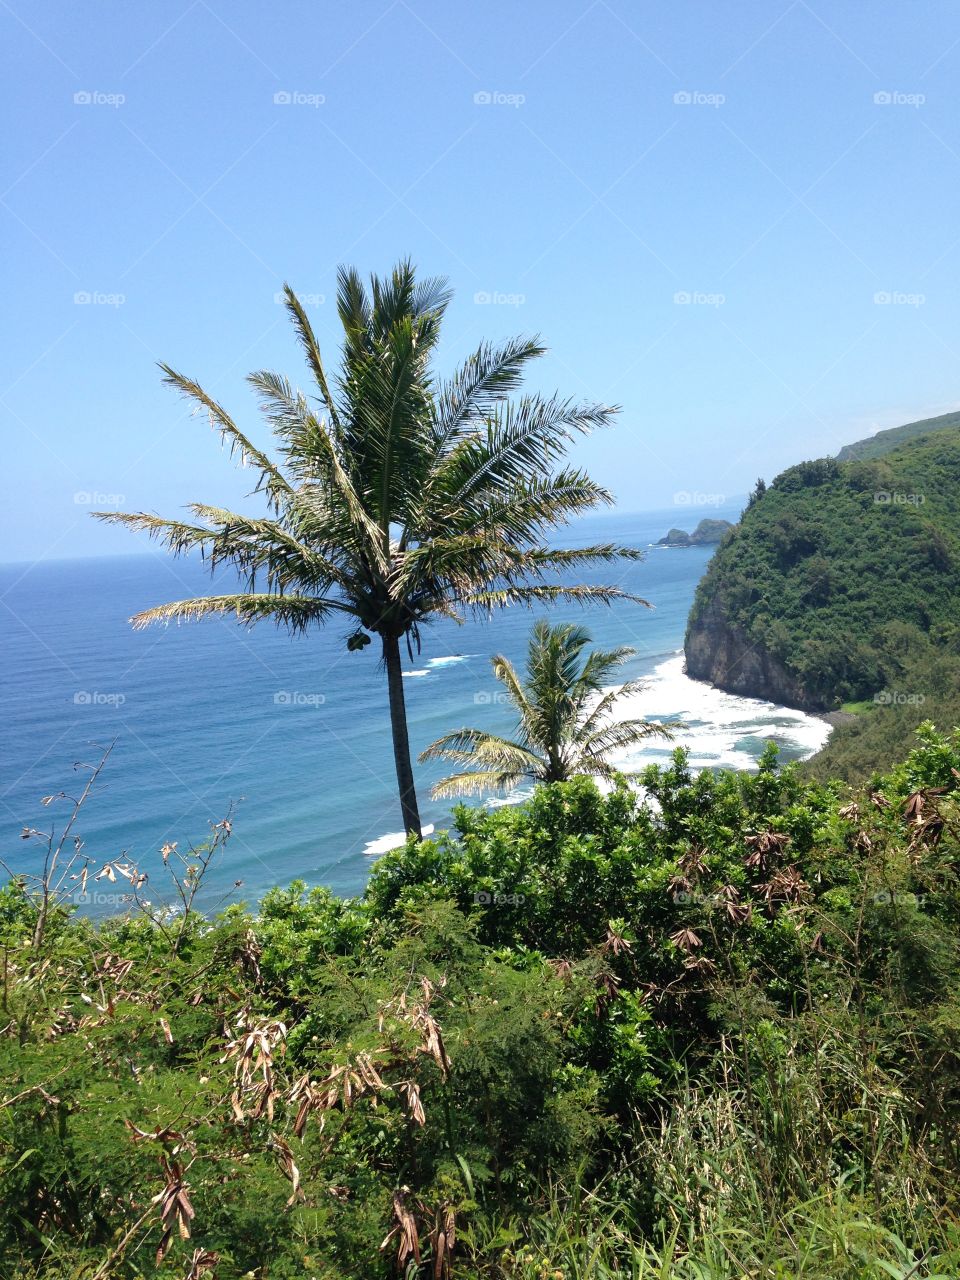 Palm trees growing on coastline with cliff